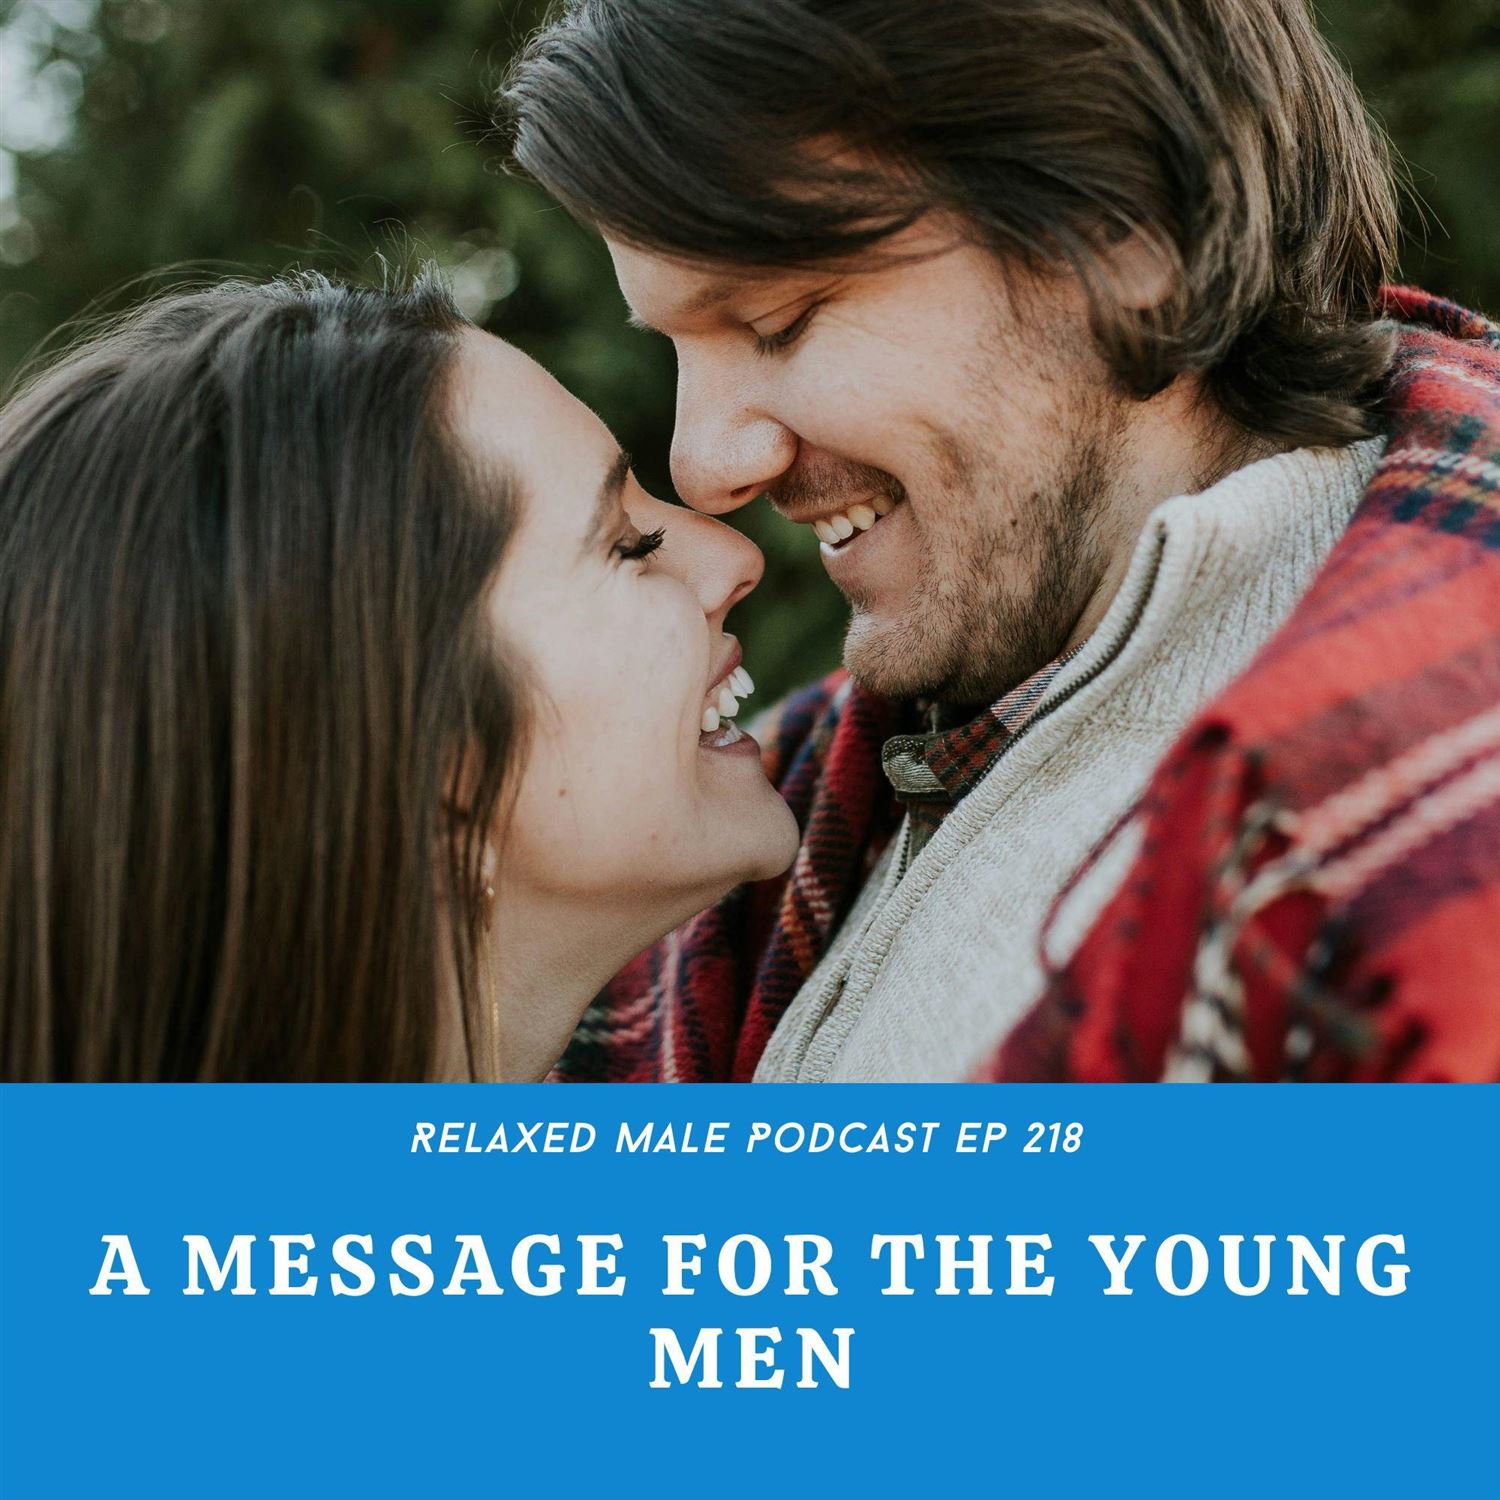 A Message for the Young Men